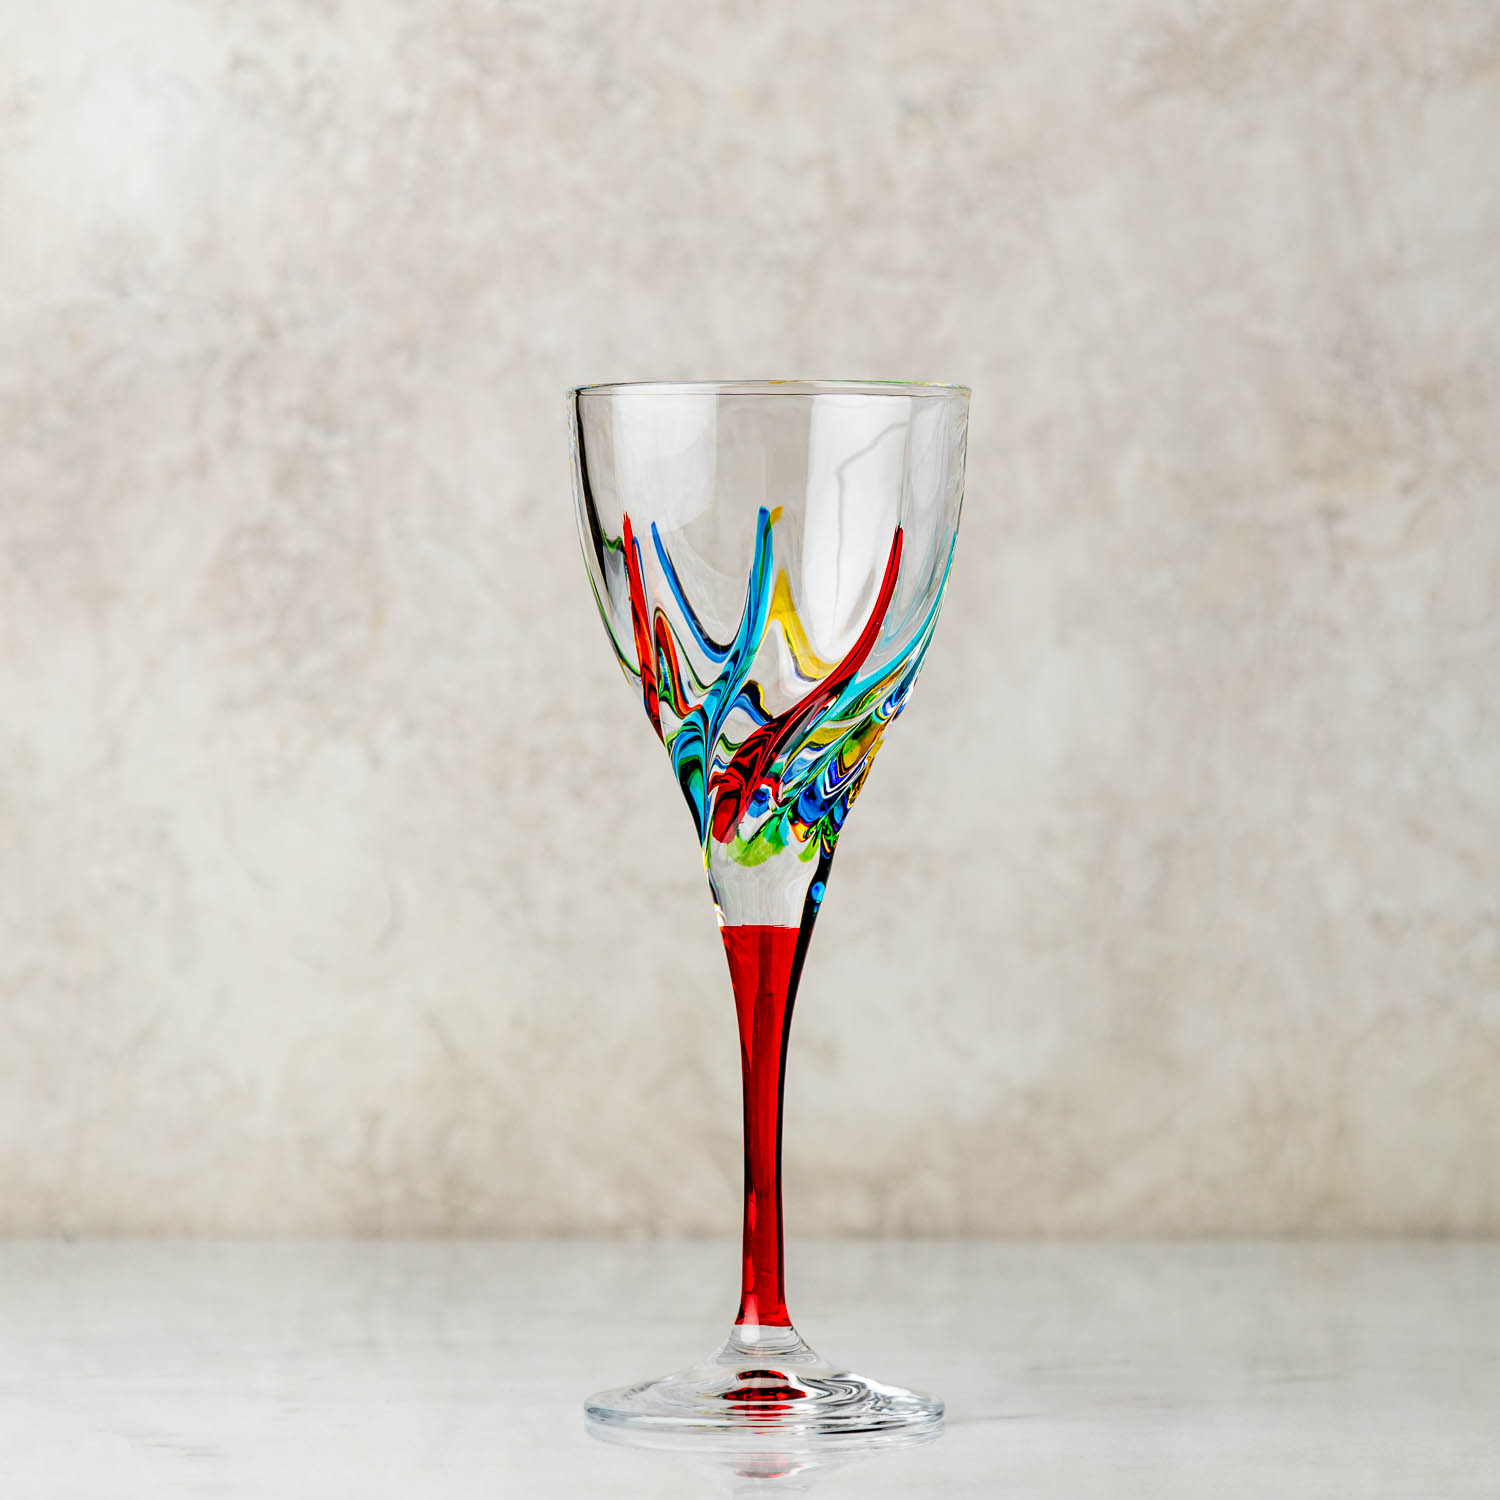 Cooper's Hawk Winery & Restaurants > Trix Collection > Trix Wine Glass,  stained glass art wine glass